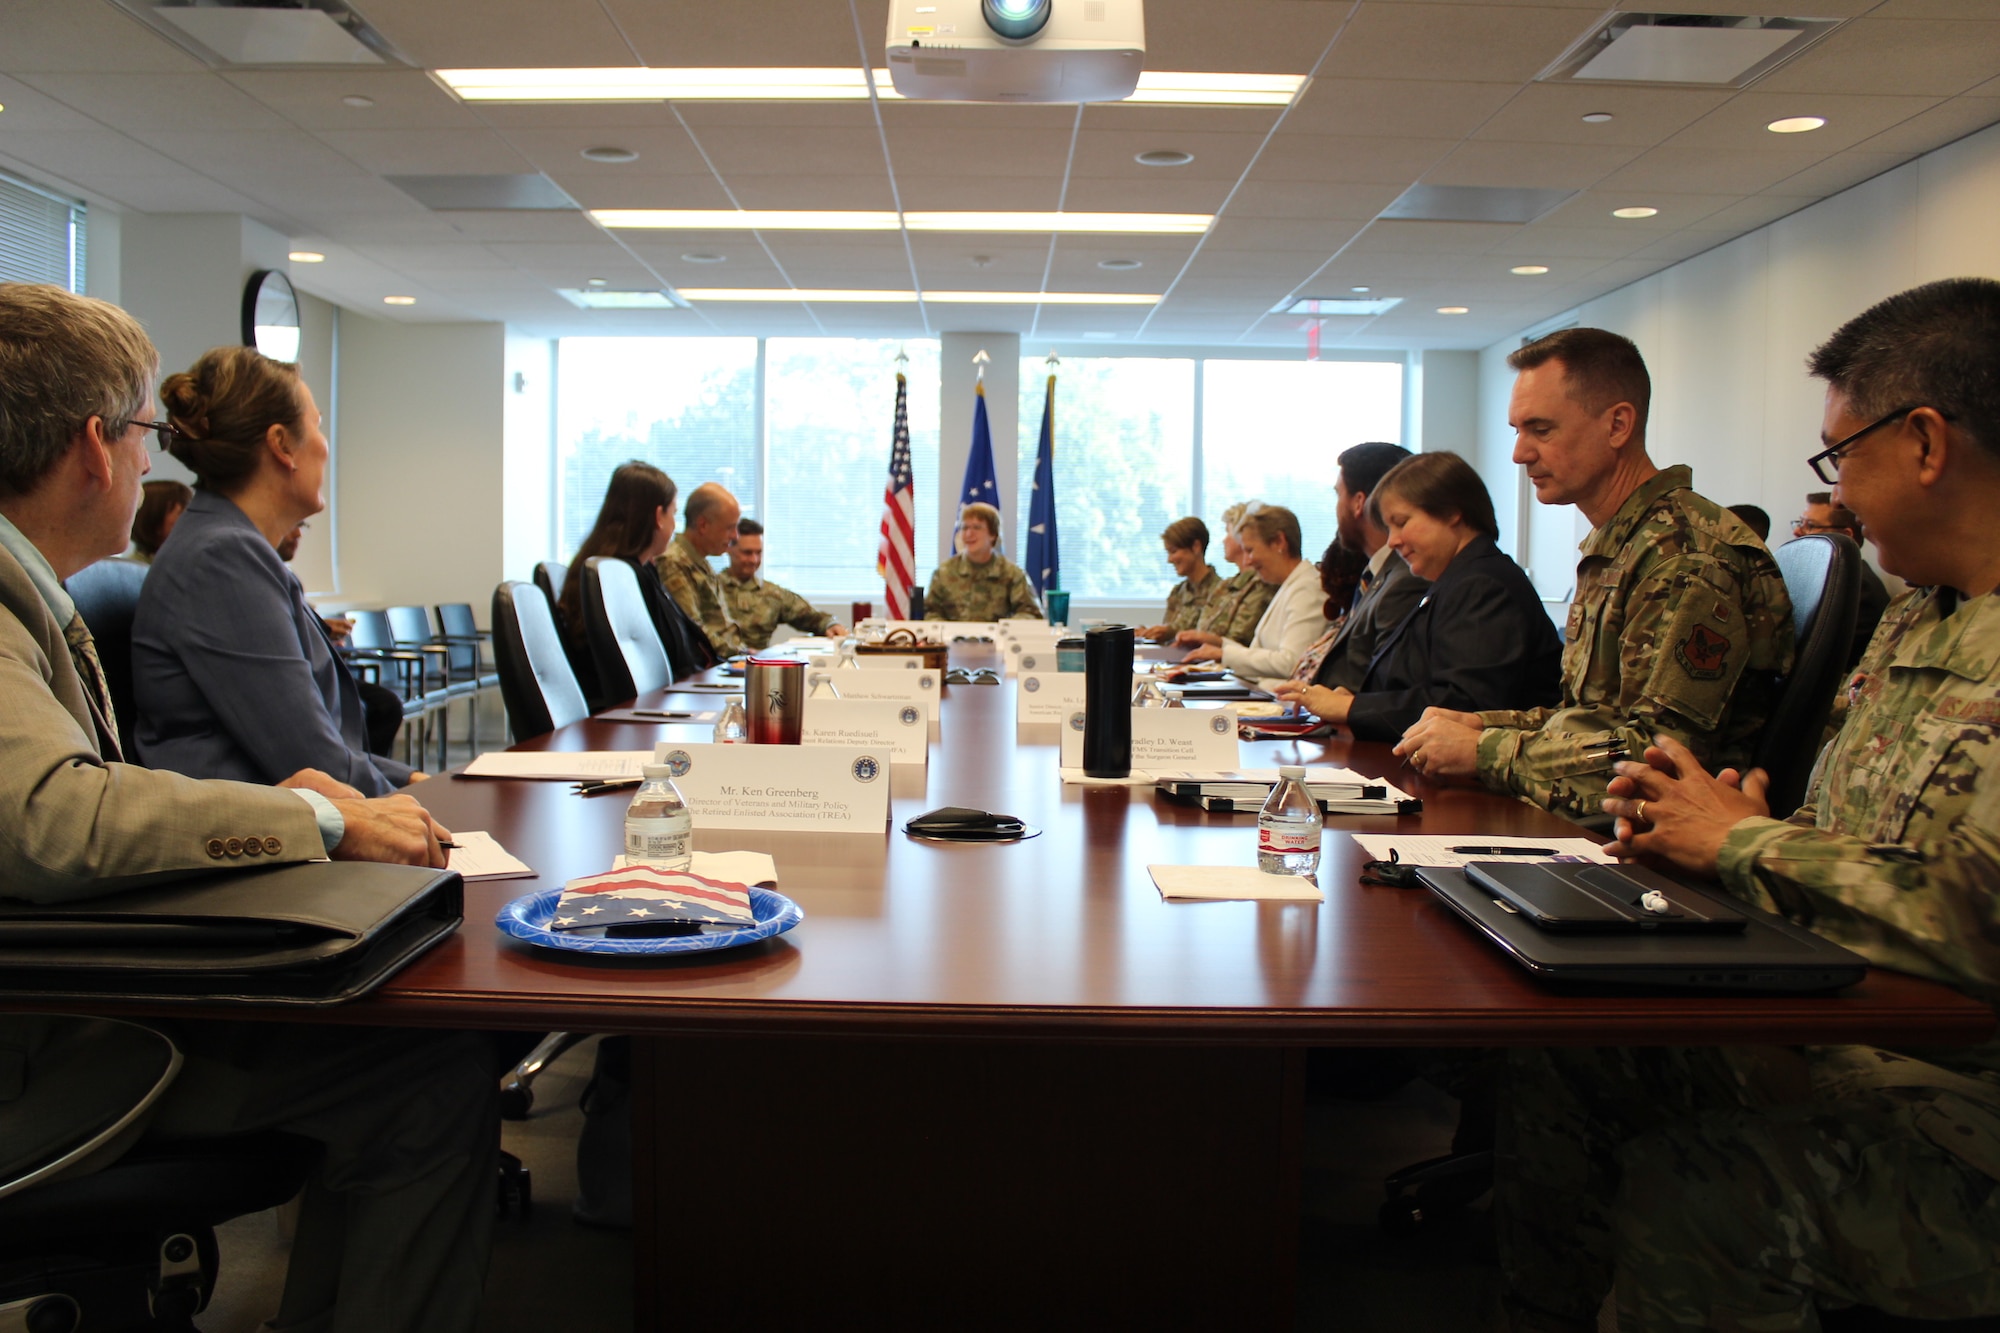 Lt. Gen. Dorothy Hogg, U.S. Air Force Surgeon General, center, leads a discussion with representatives of military and veteran service organizations at the Defense Health Headquarters in Falls Church, Virginia, Sept. 4, 2019. (U.S. Air Force photo by Josh Mahler)